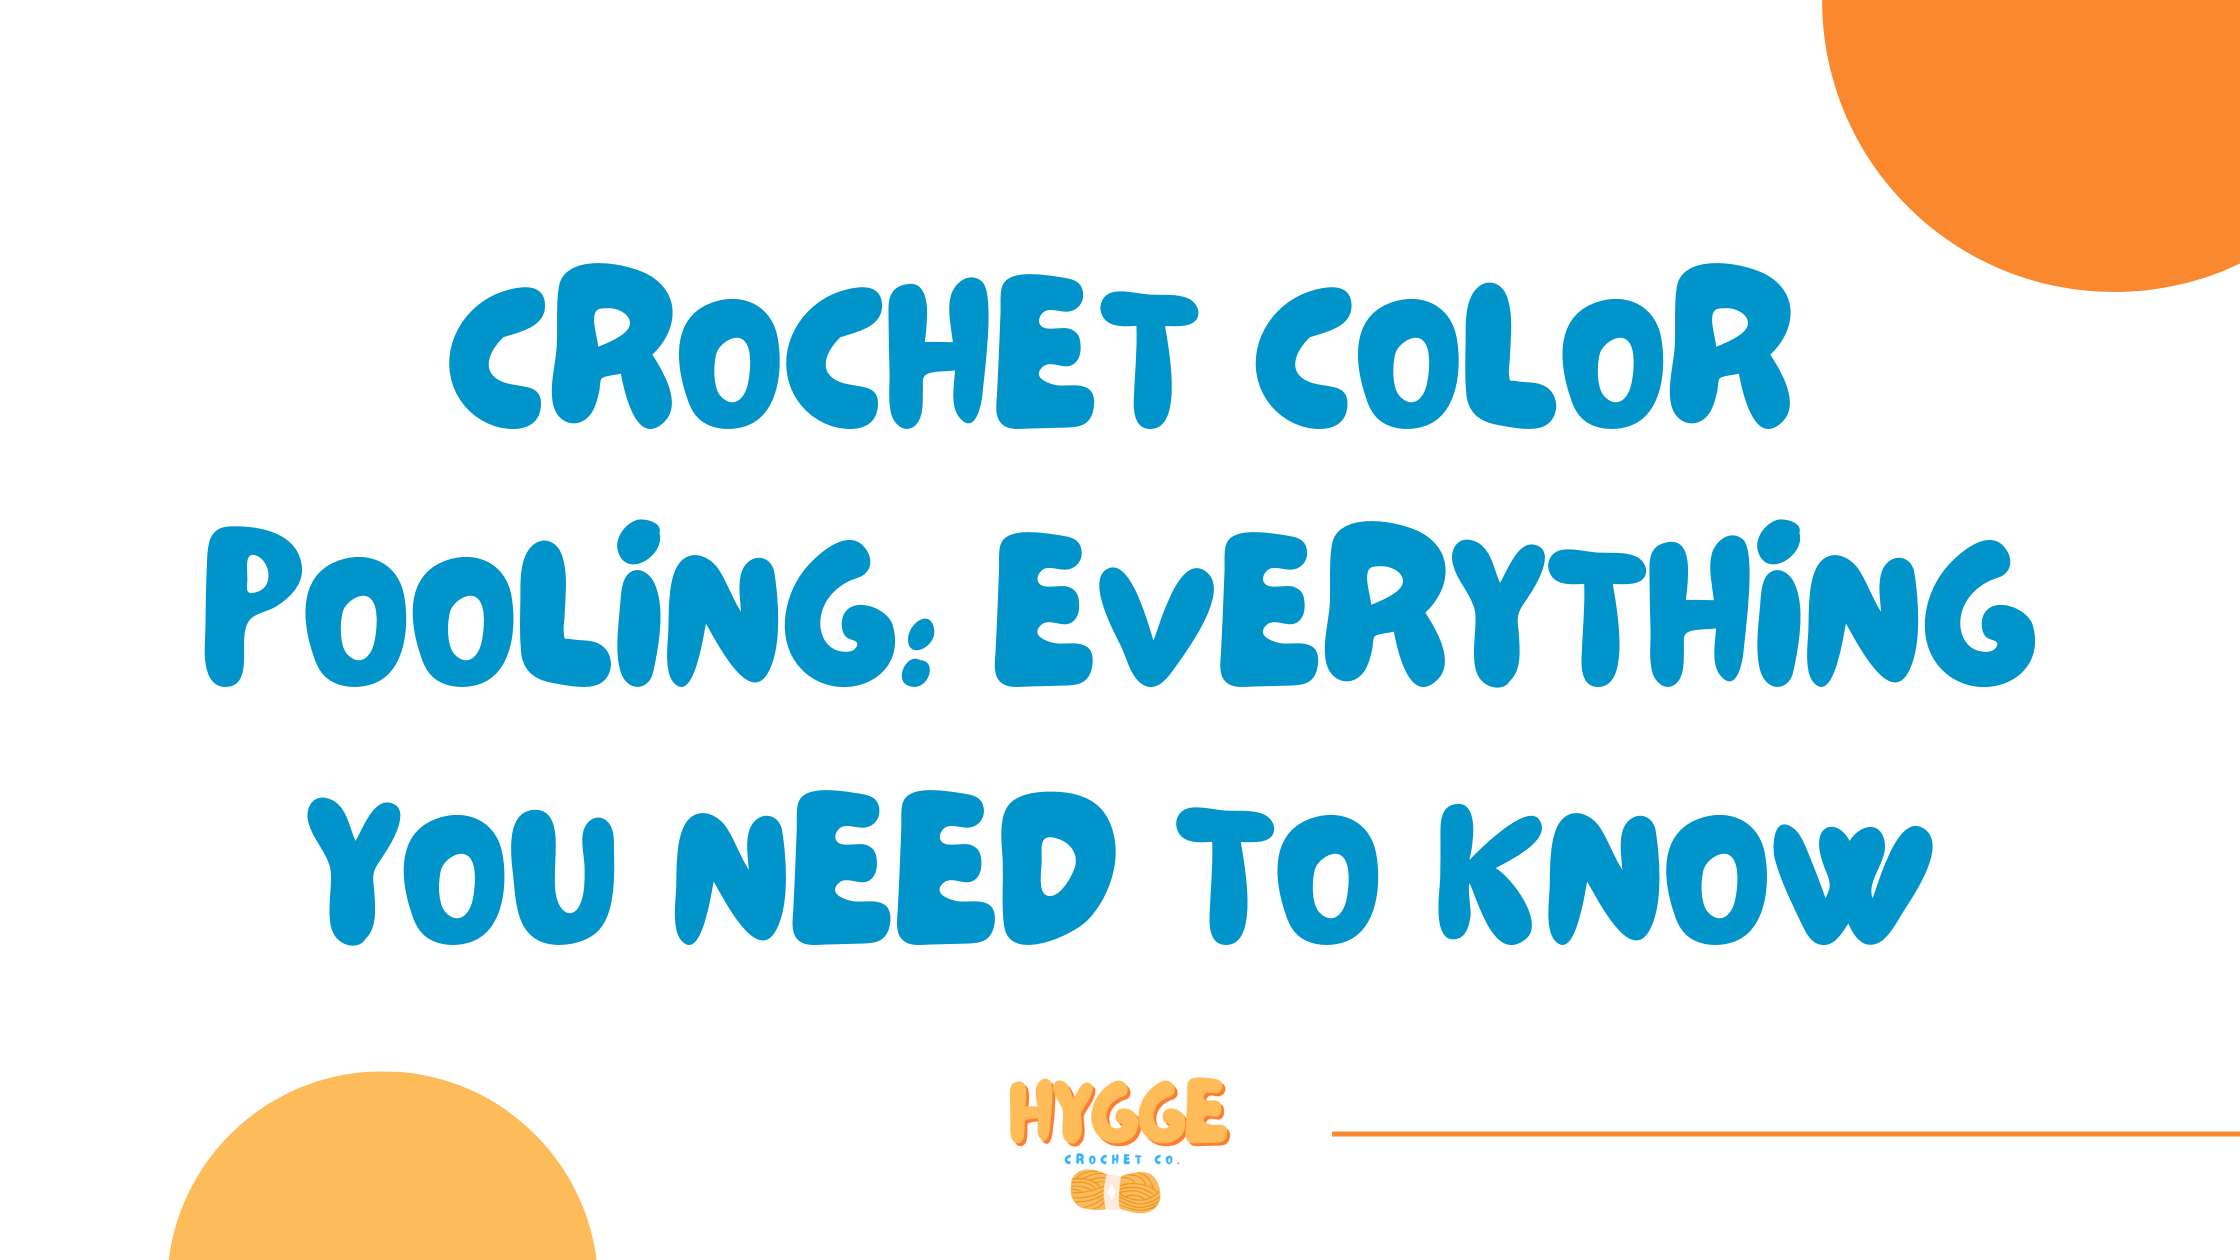 Crochet Color Pooling: Everything You Need to Know About Planned Pooling